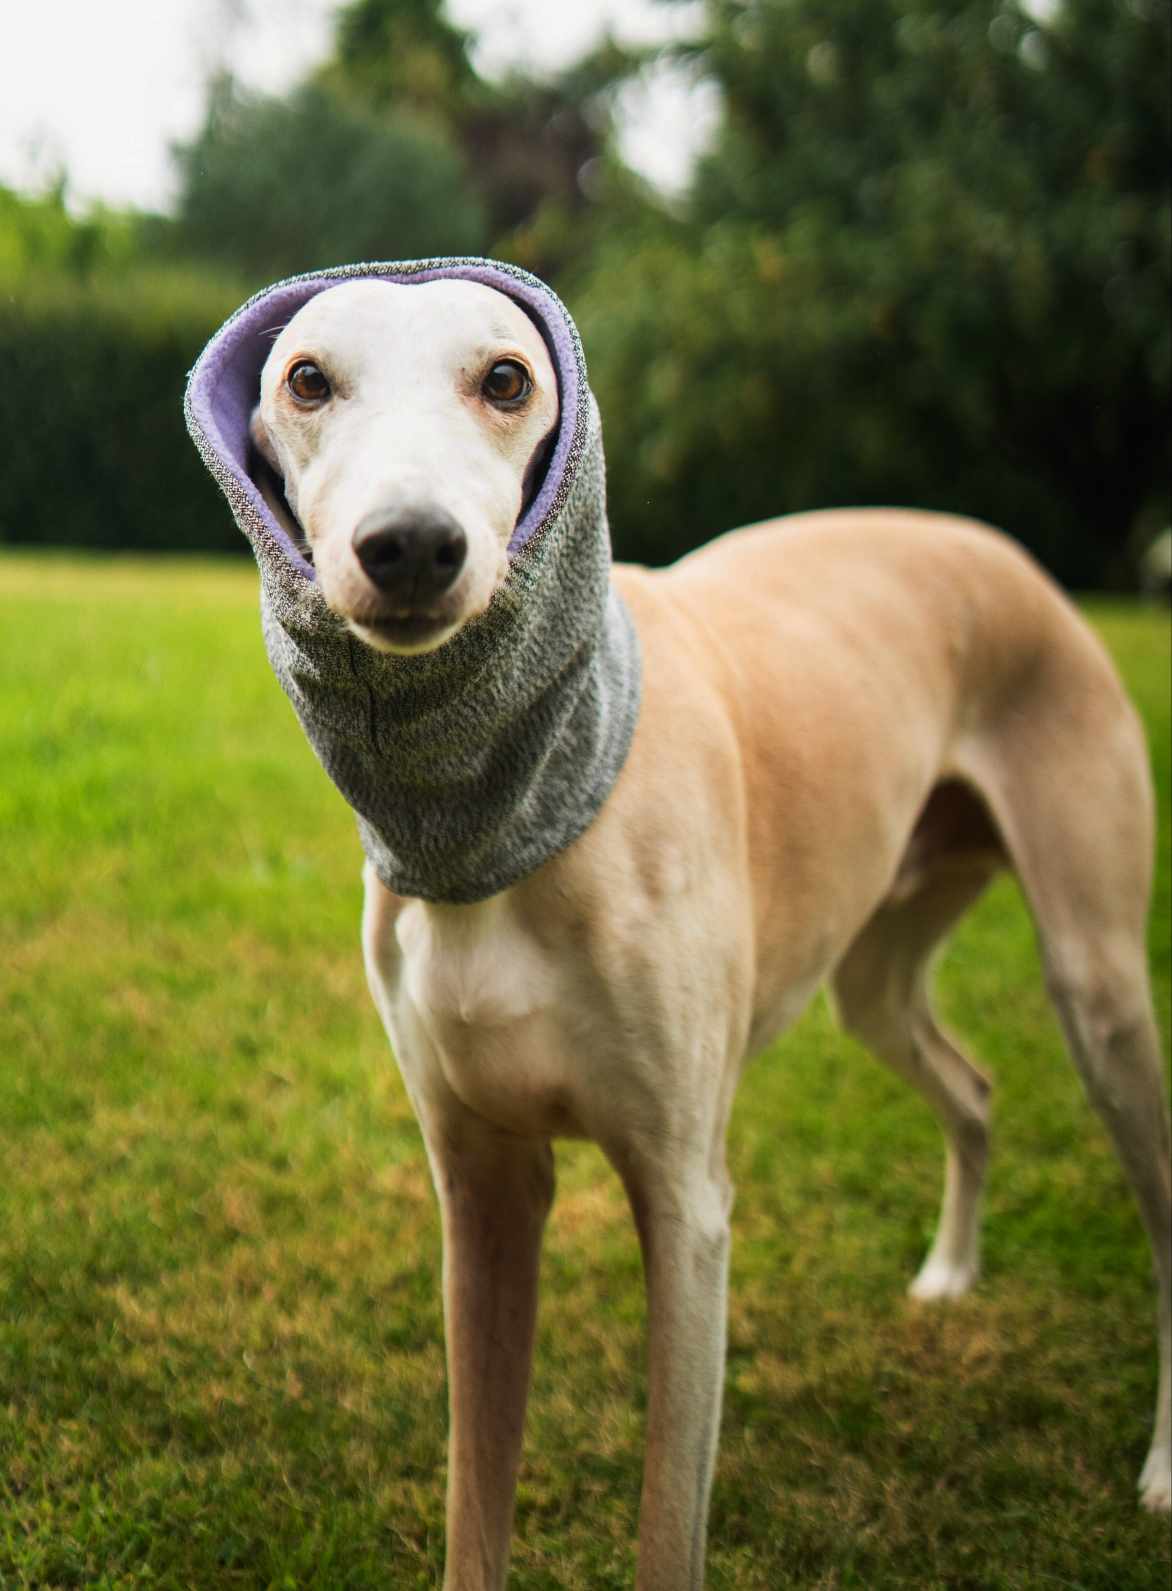 West & Jones Devon Snood- a safety snood to protector dogs from cuts, puncture and bite wounds. Medium, Lilac Heather.